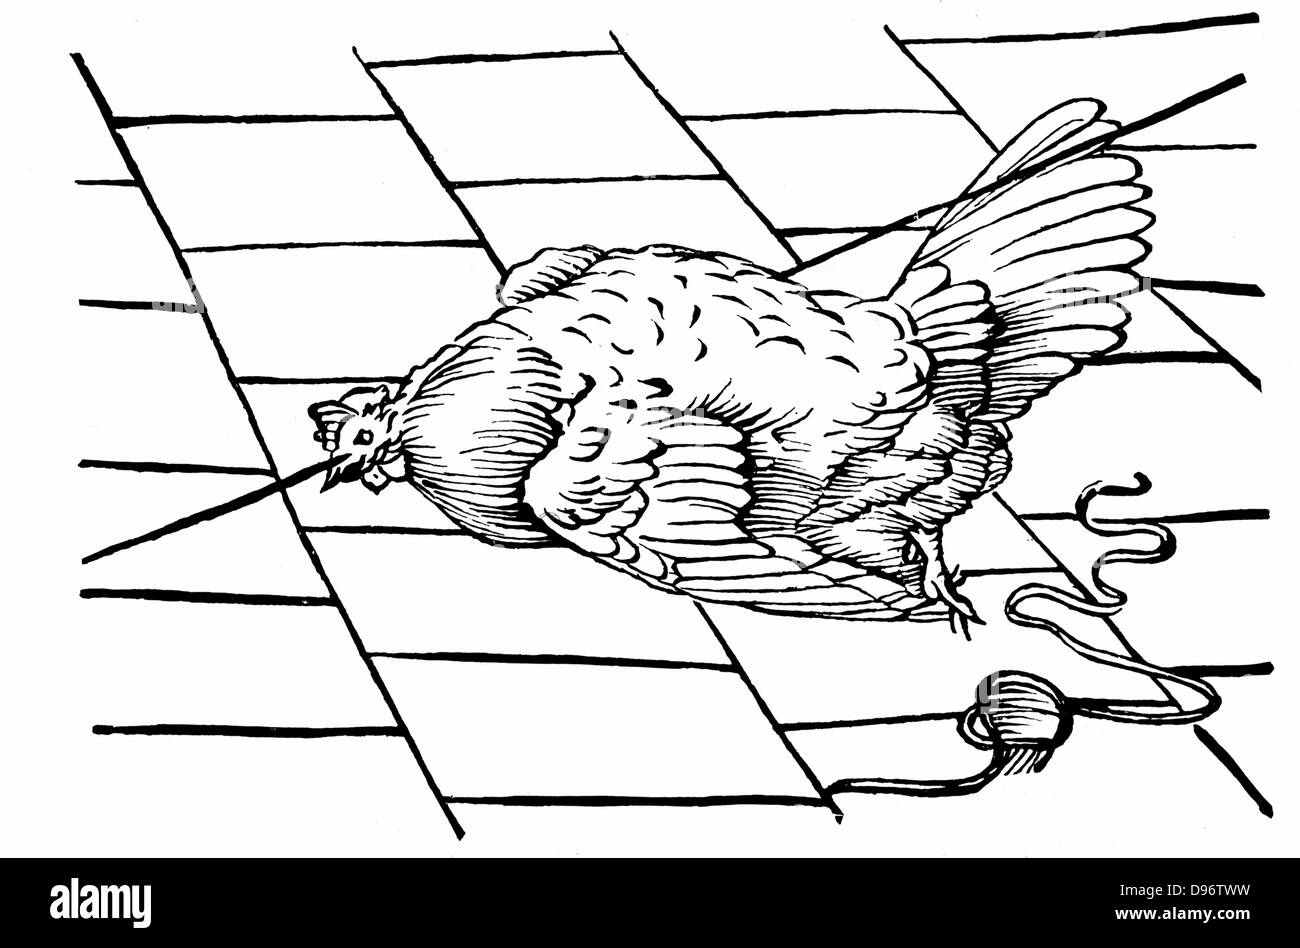 Experimentum Mirabile. From Athanasius Kircher 'Physiologia Kircheriana', 1680. Chicken hypnotised by beak being place on a line. Woodcut. Stock Photo